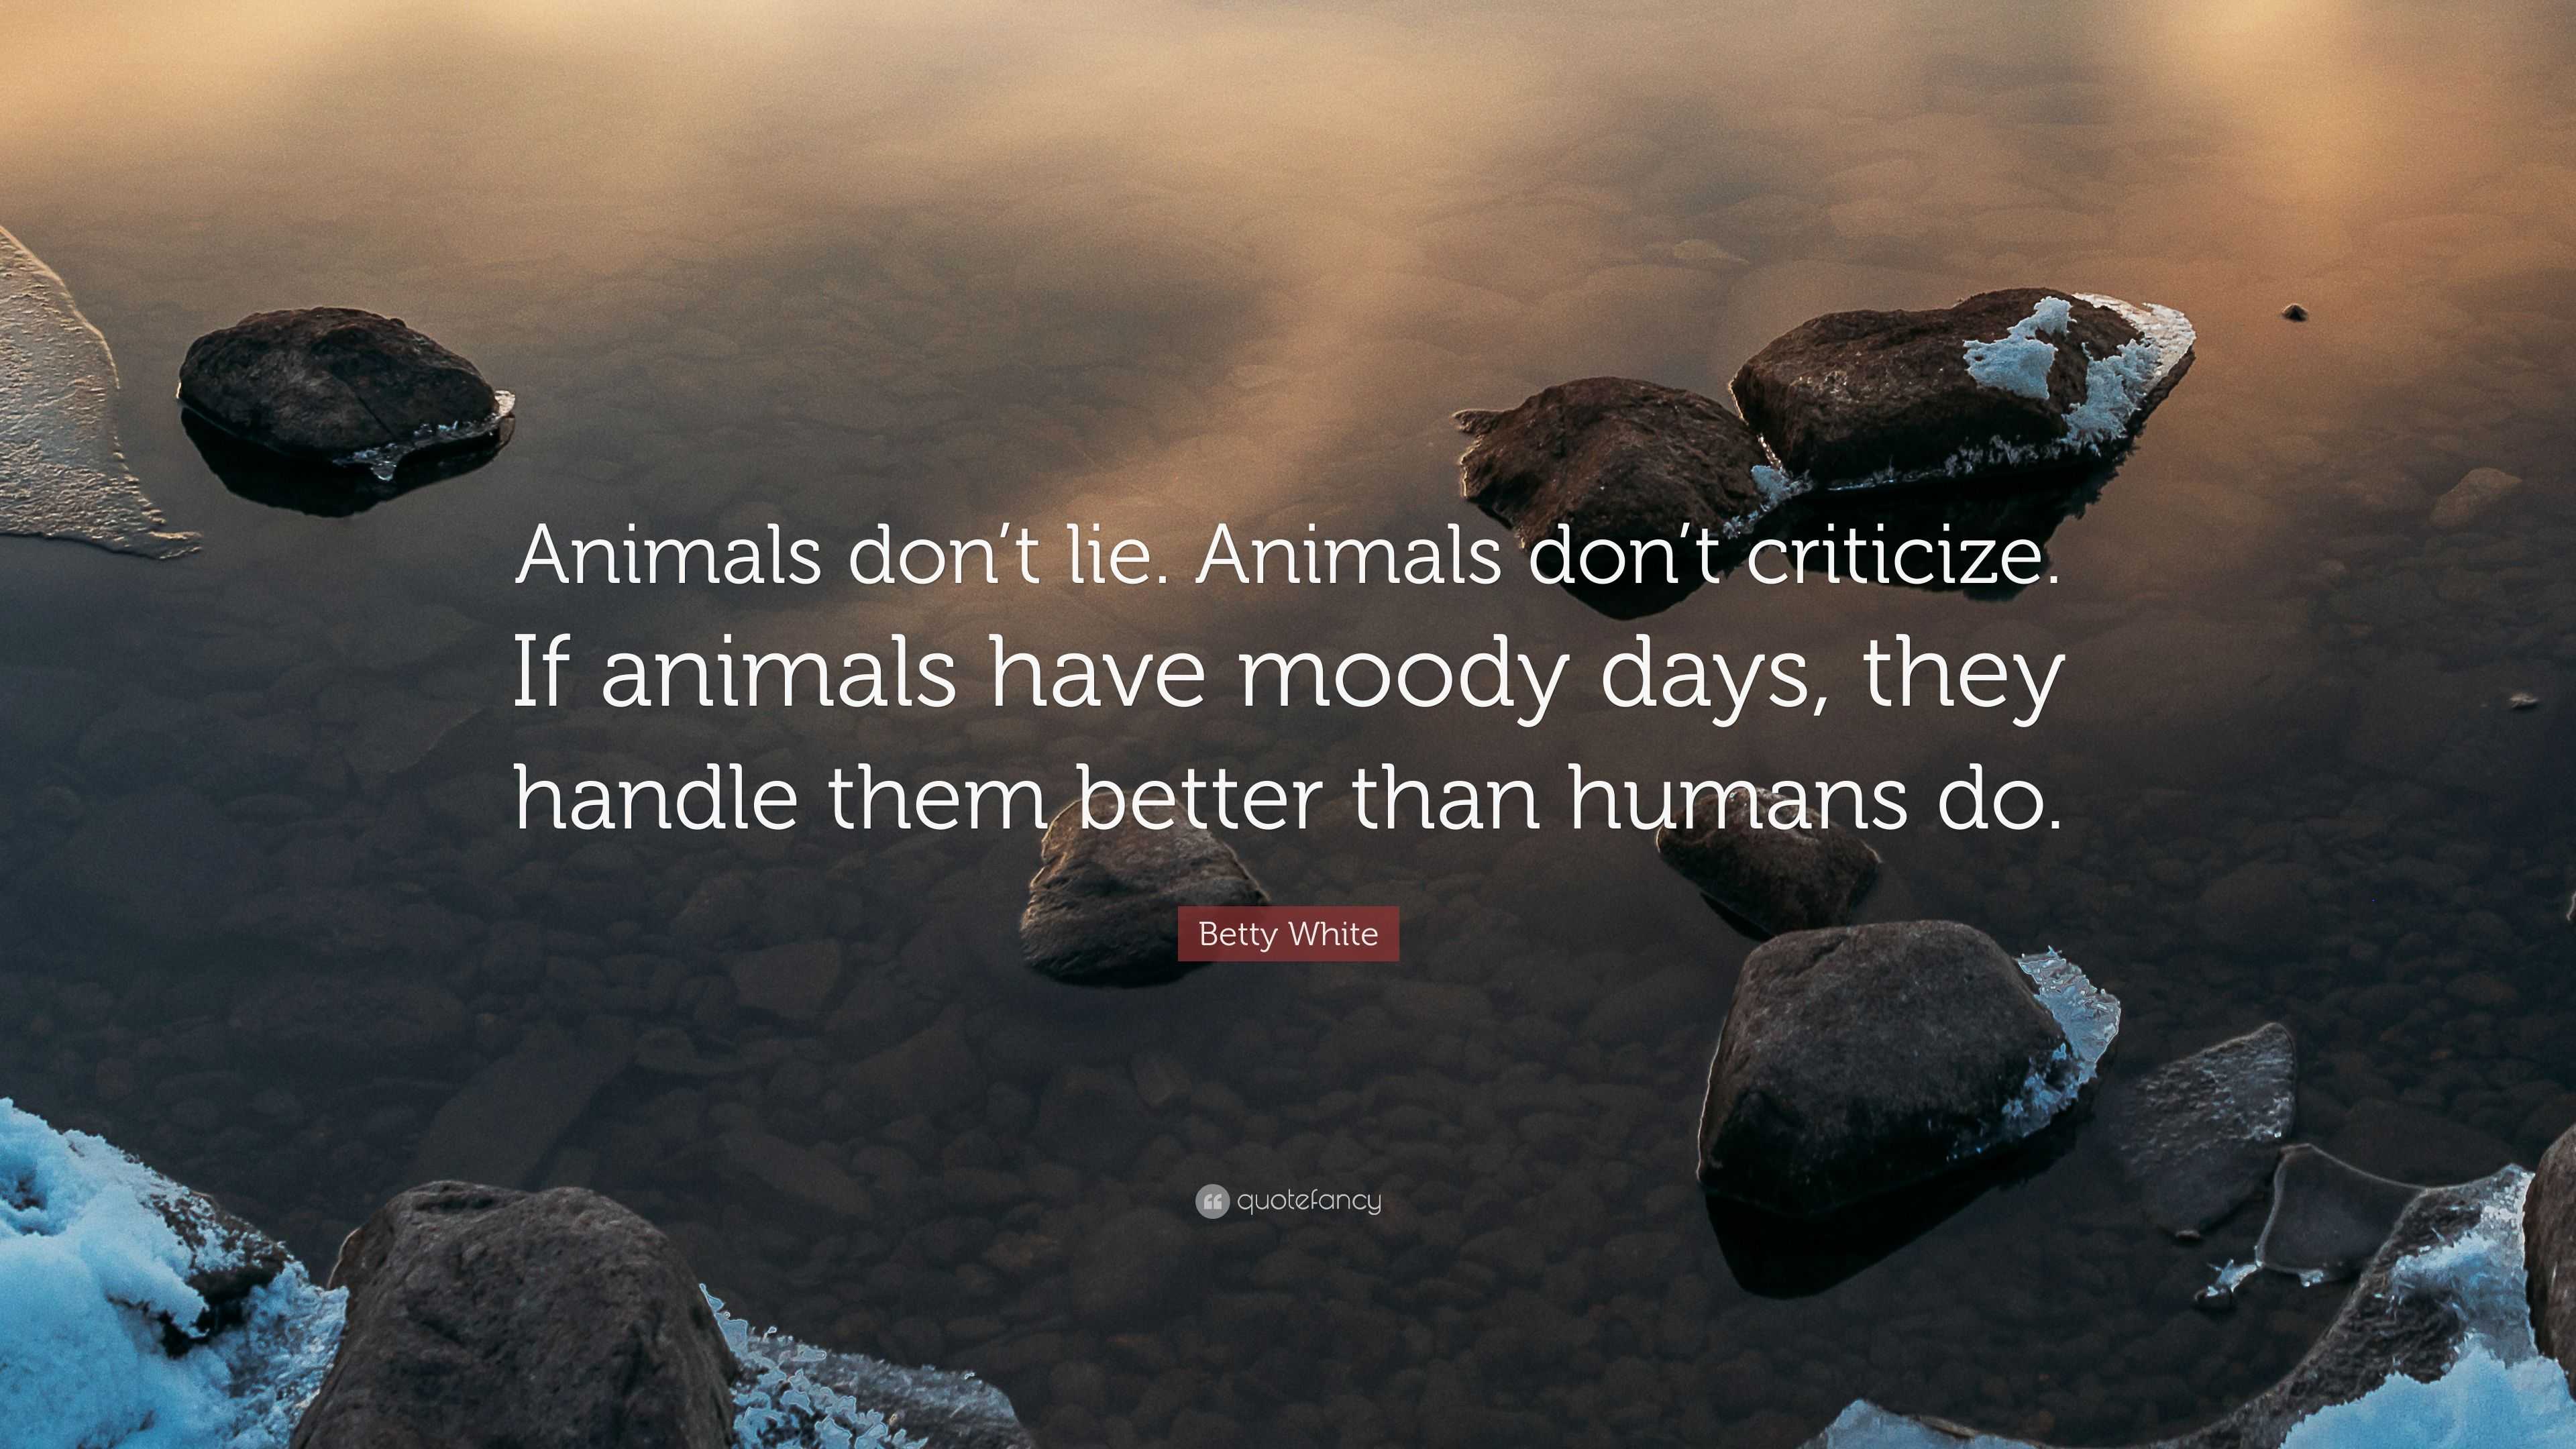 Betty White Quote: “Animals don't lie. Animals don't criticize. If animals  have moody days,